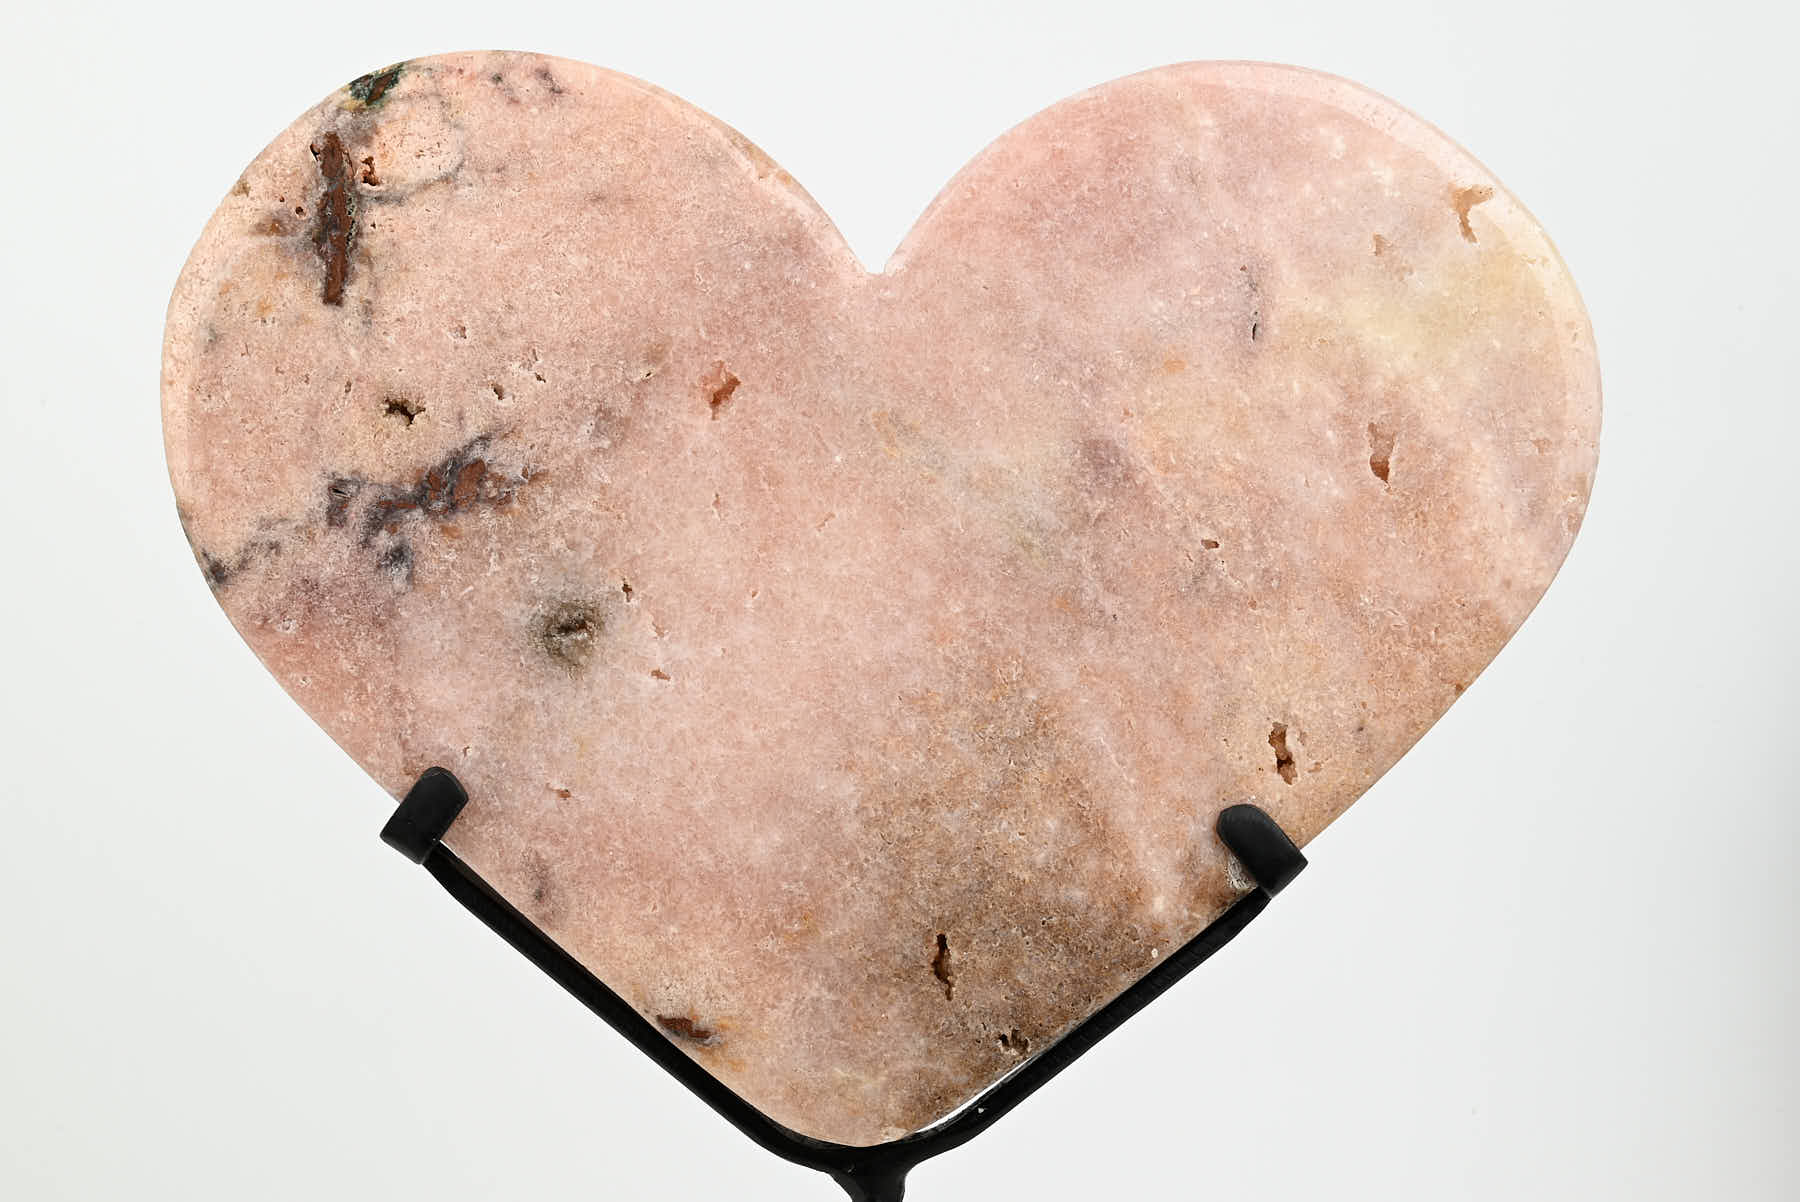 Extra Quality Pink Amethyst Heart - 2.88kg, 28cm high - #HTPINK-34023